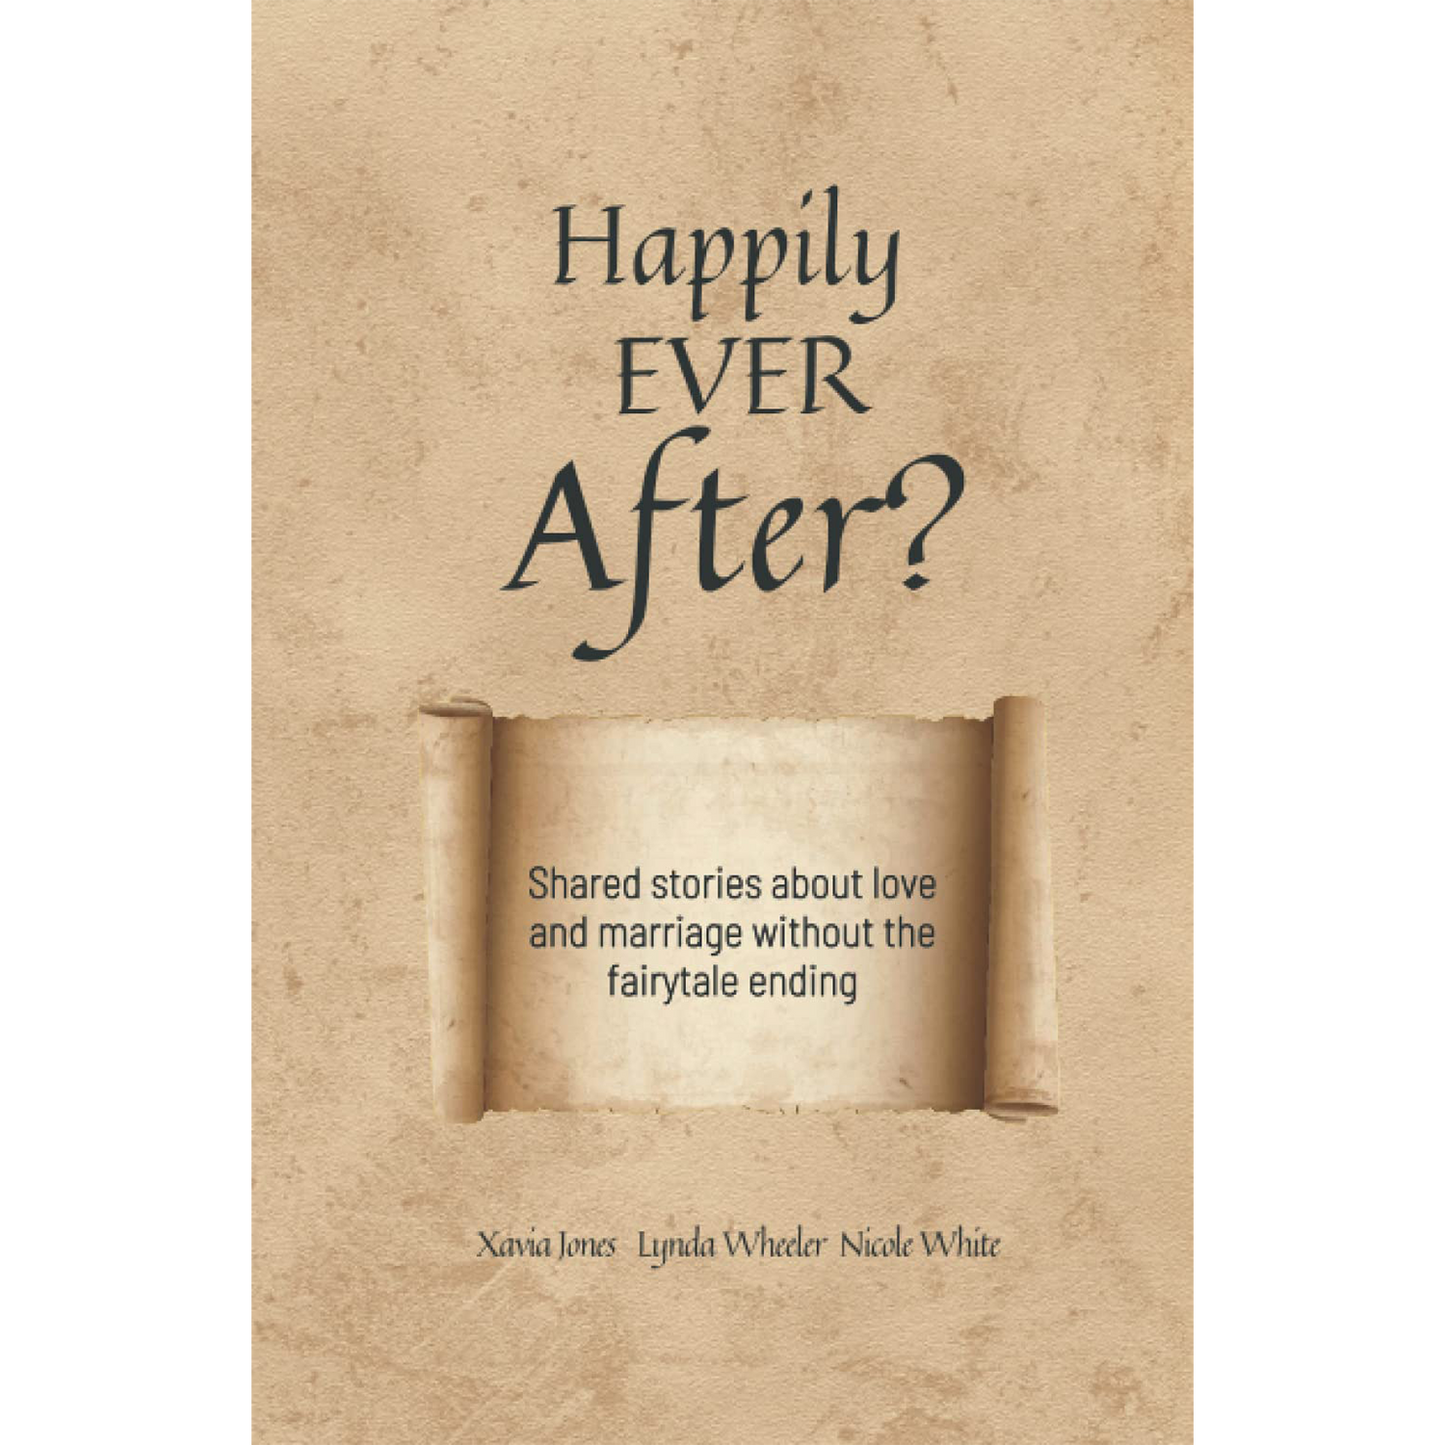 Happily Ever After?: Shared stories about love and marriage without the fairytale ending